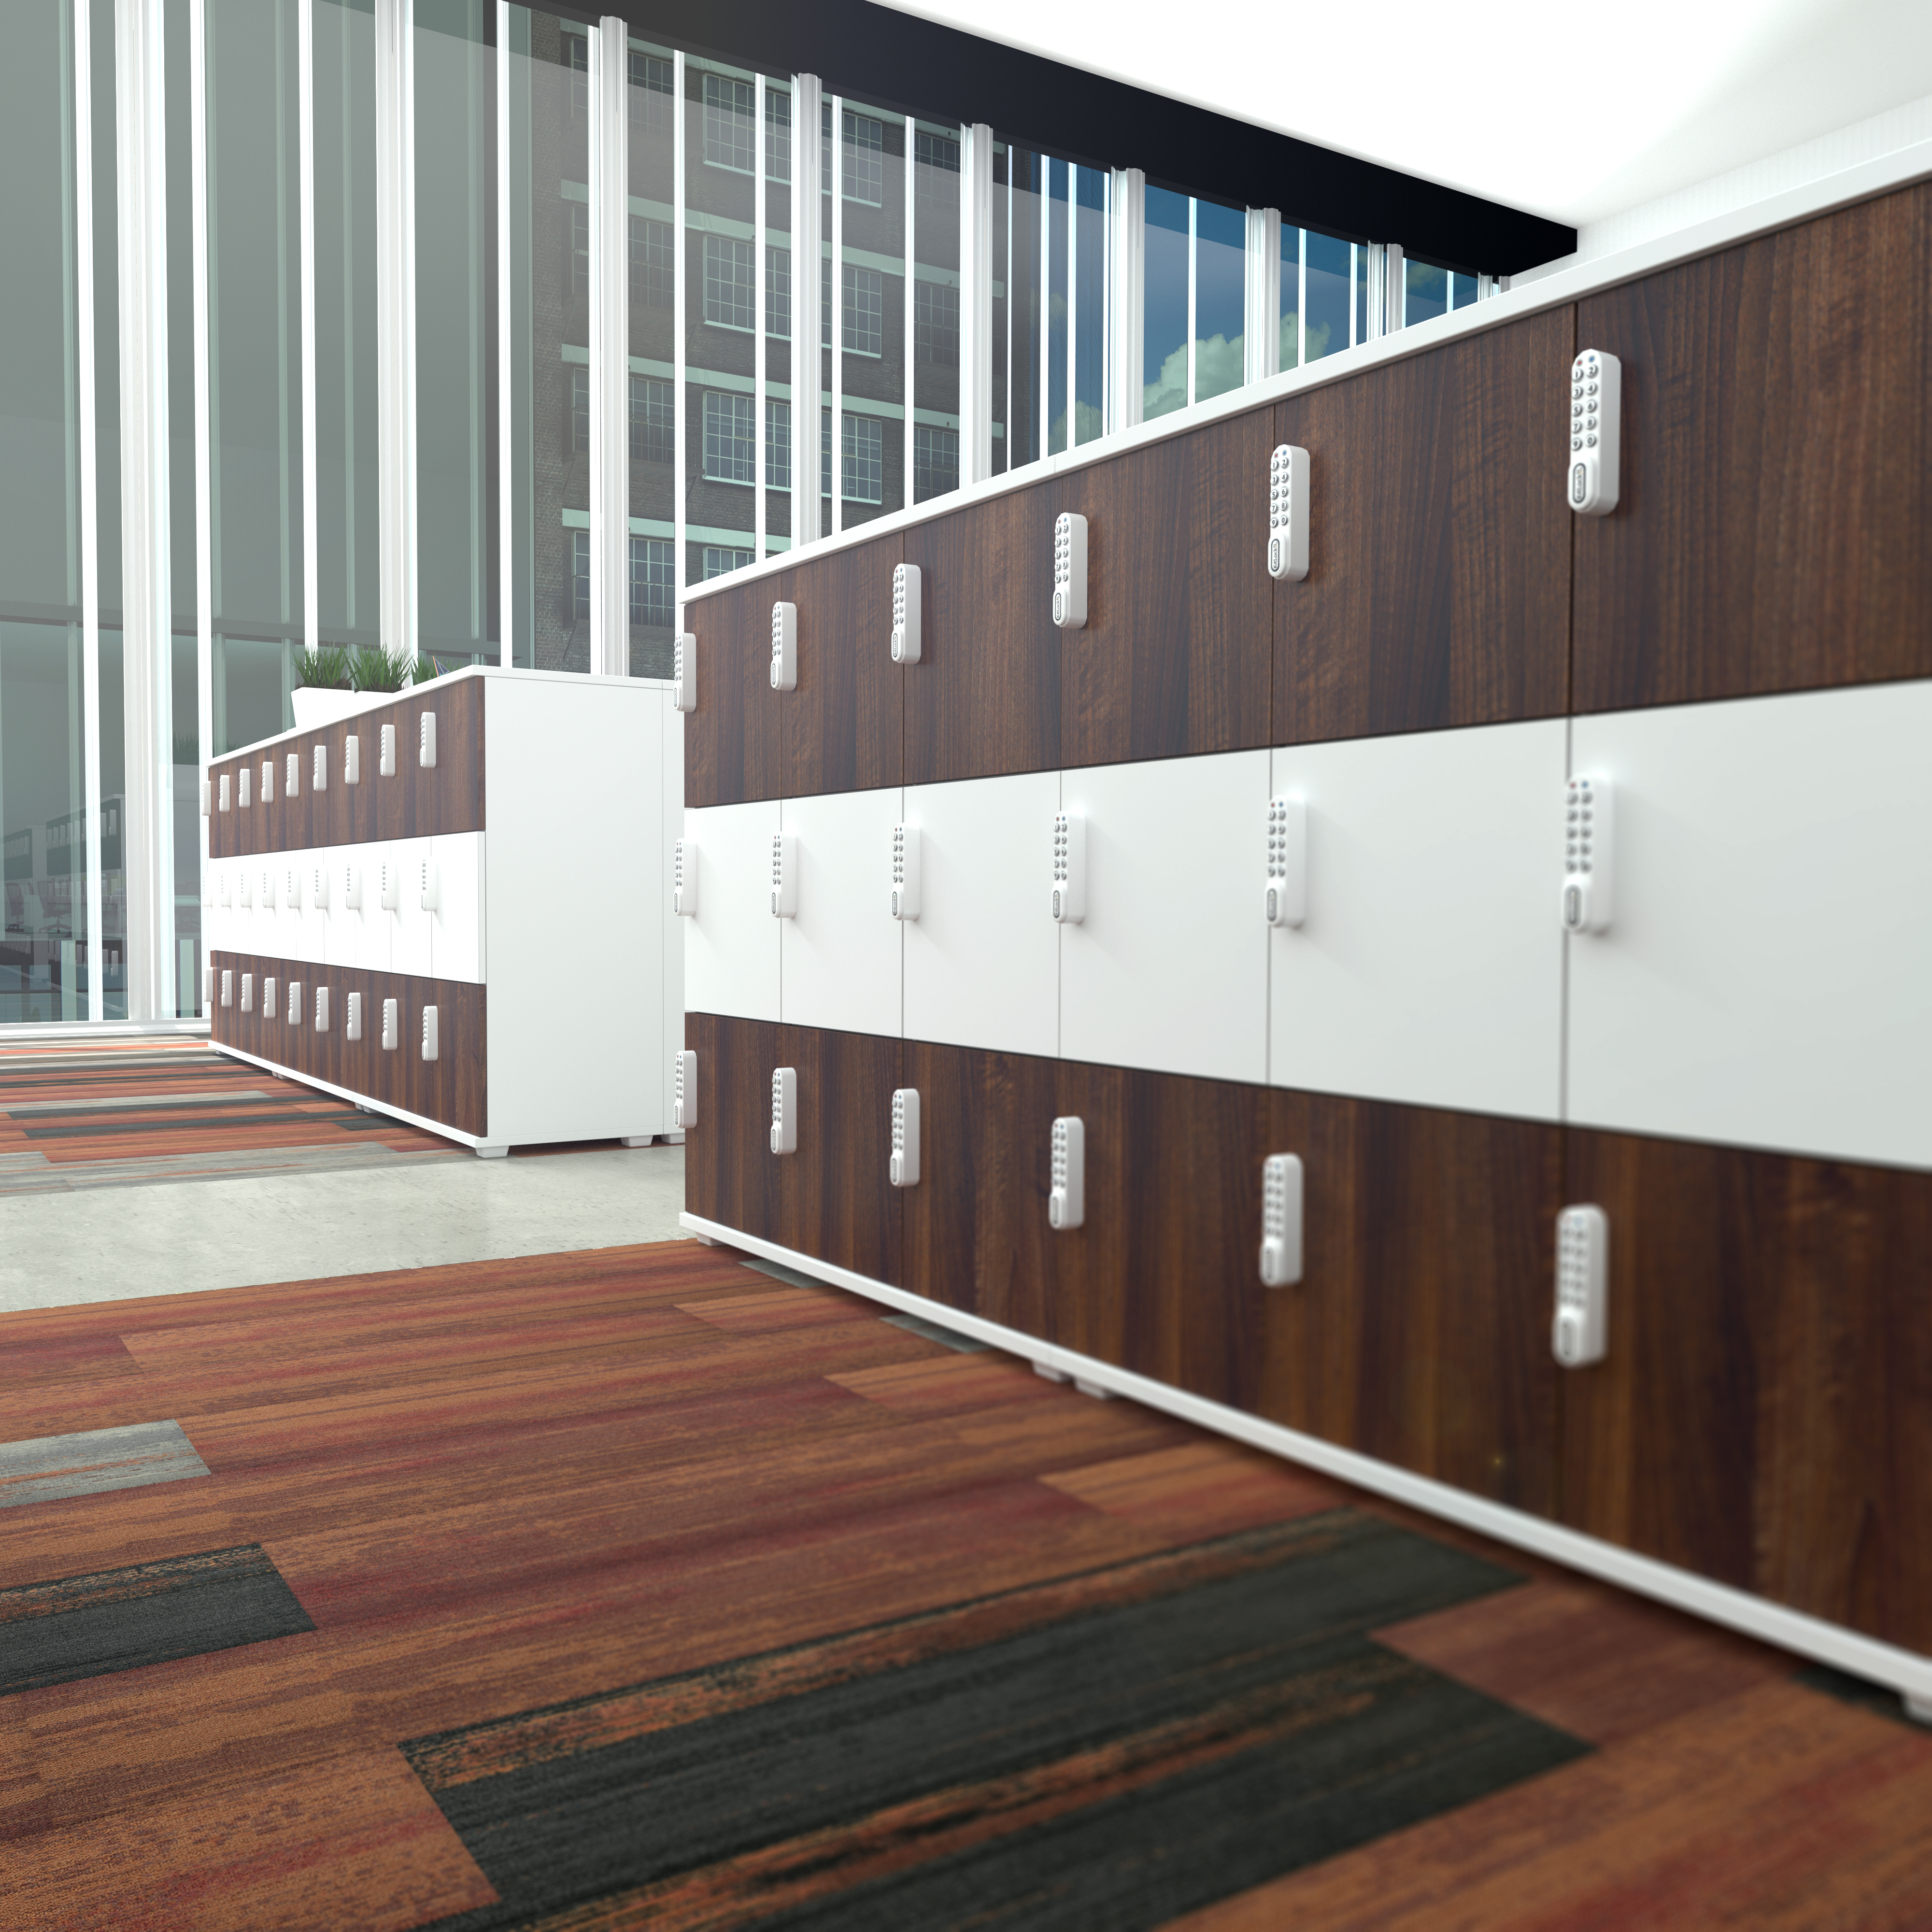 Lockers in an evolving workplace